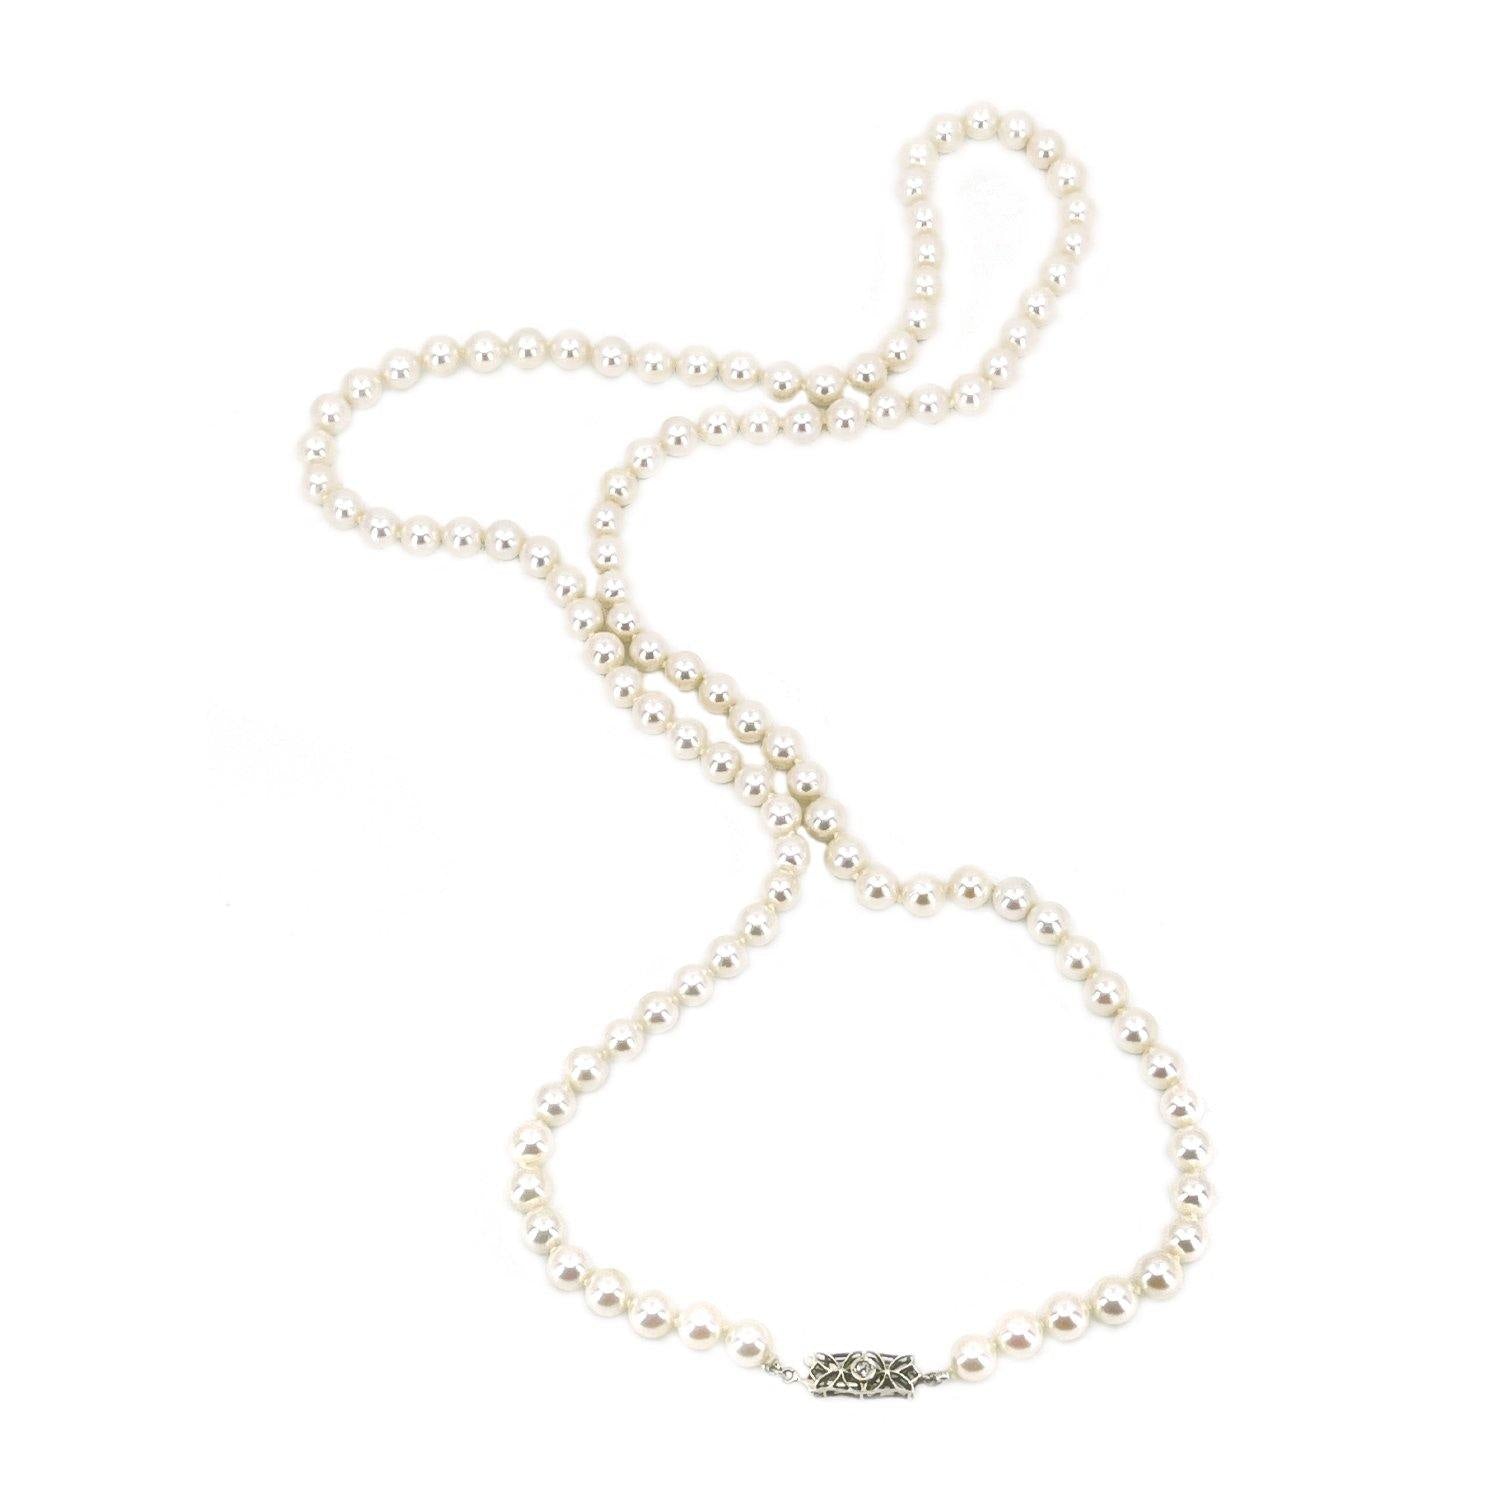 Art Nouveau Japanese Saltwater Cultured Akoya Pearl Necklace - 14K White Gold Diamond 27 Inch